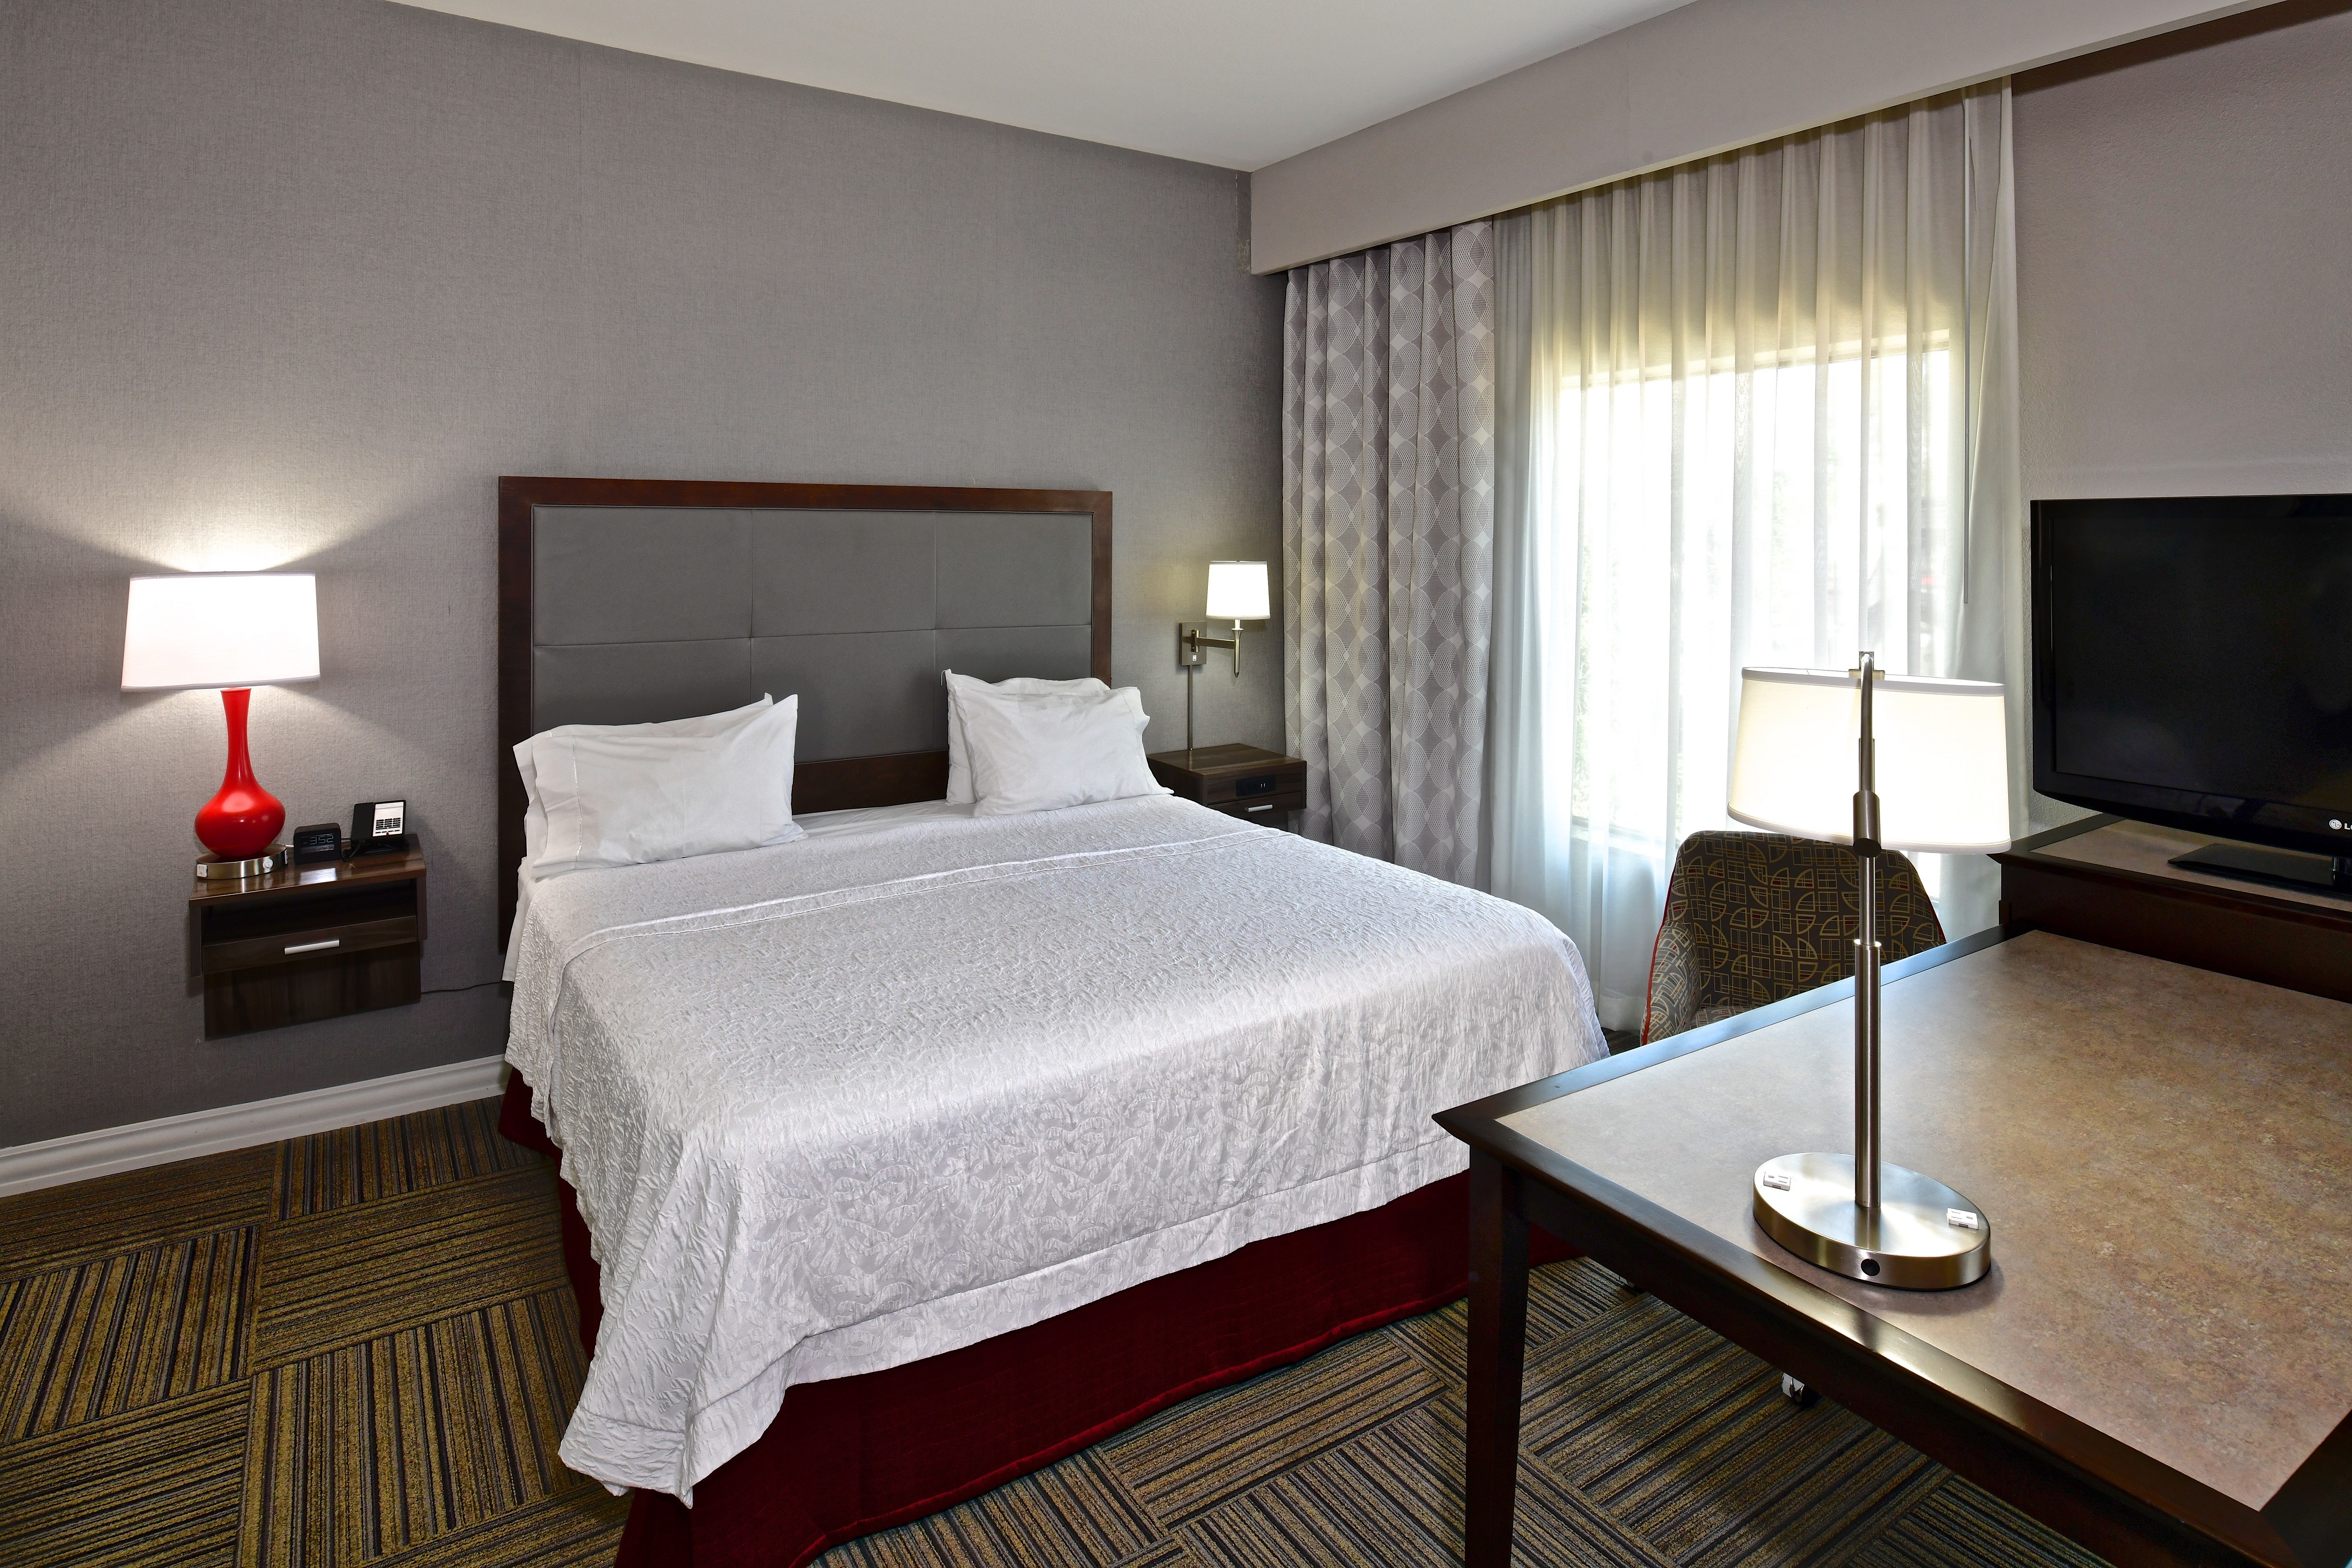 Guest Suite with King Bed, Work Desk and Television